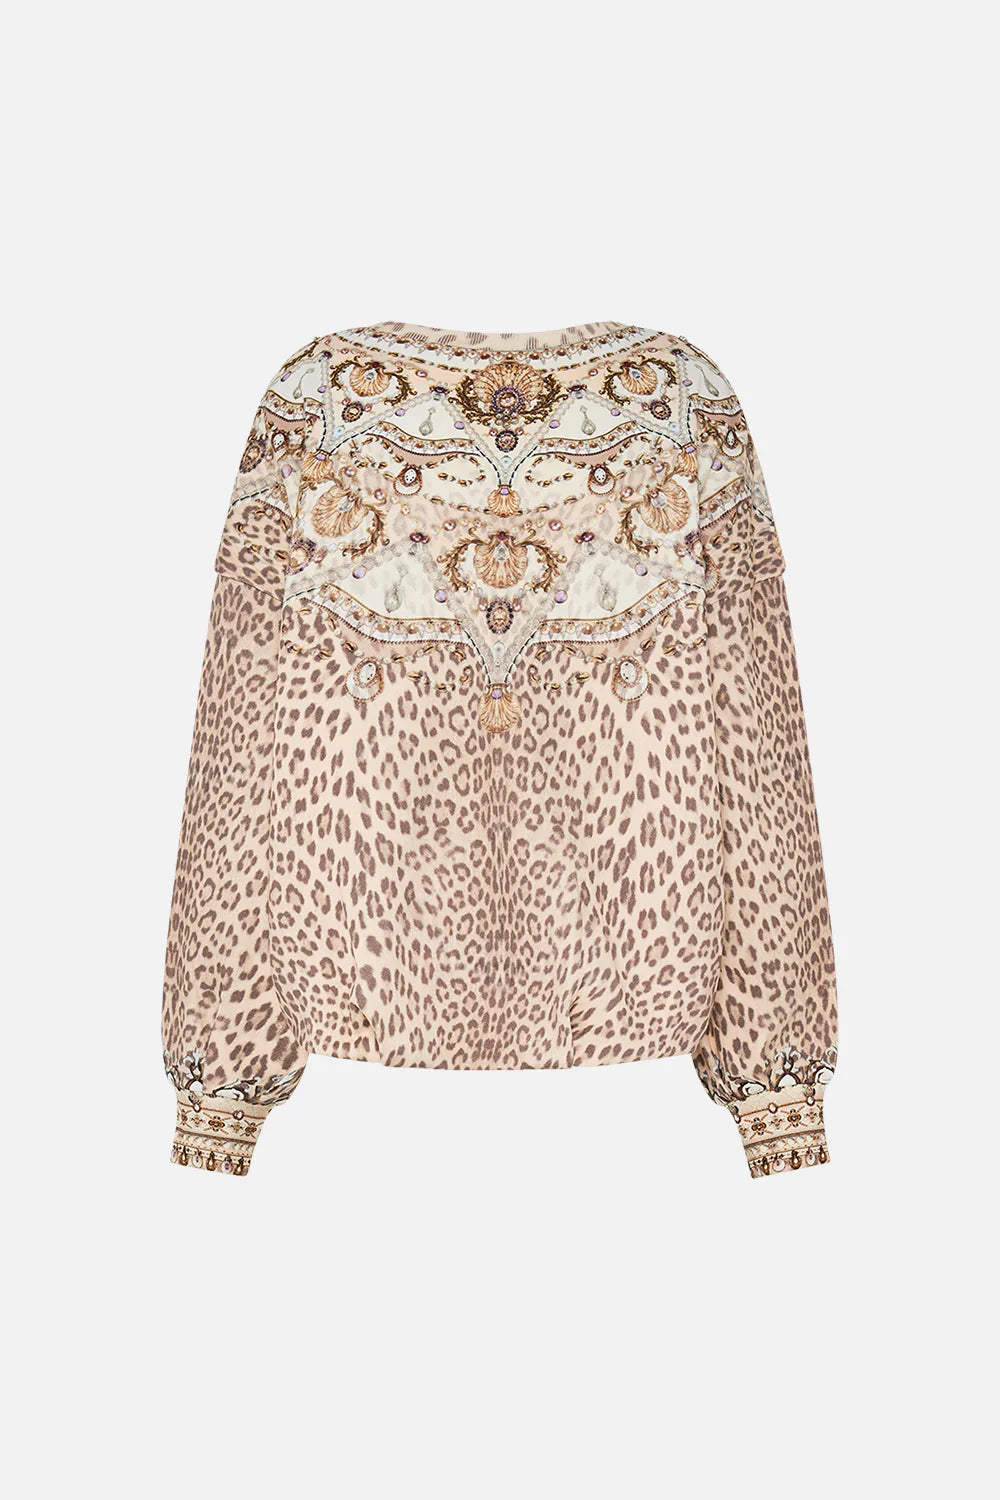 Embellished tuck detail sweater, grotto goddess